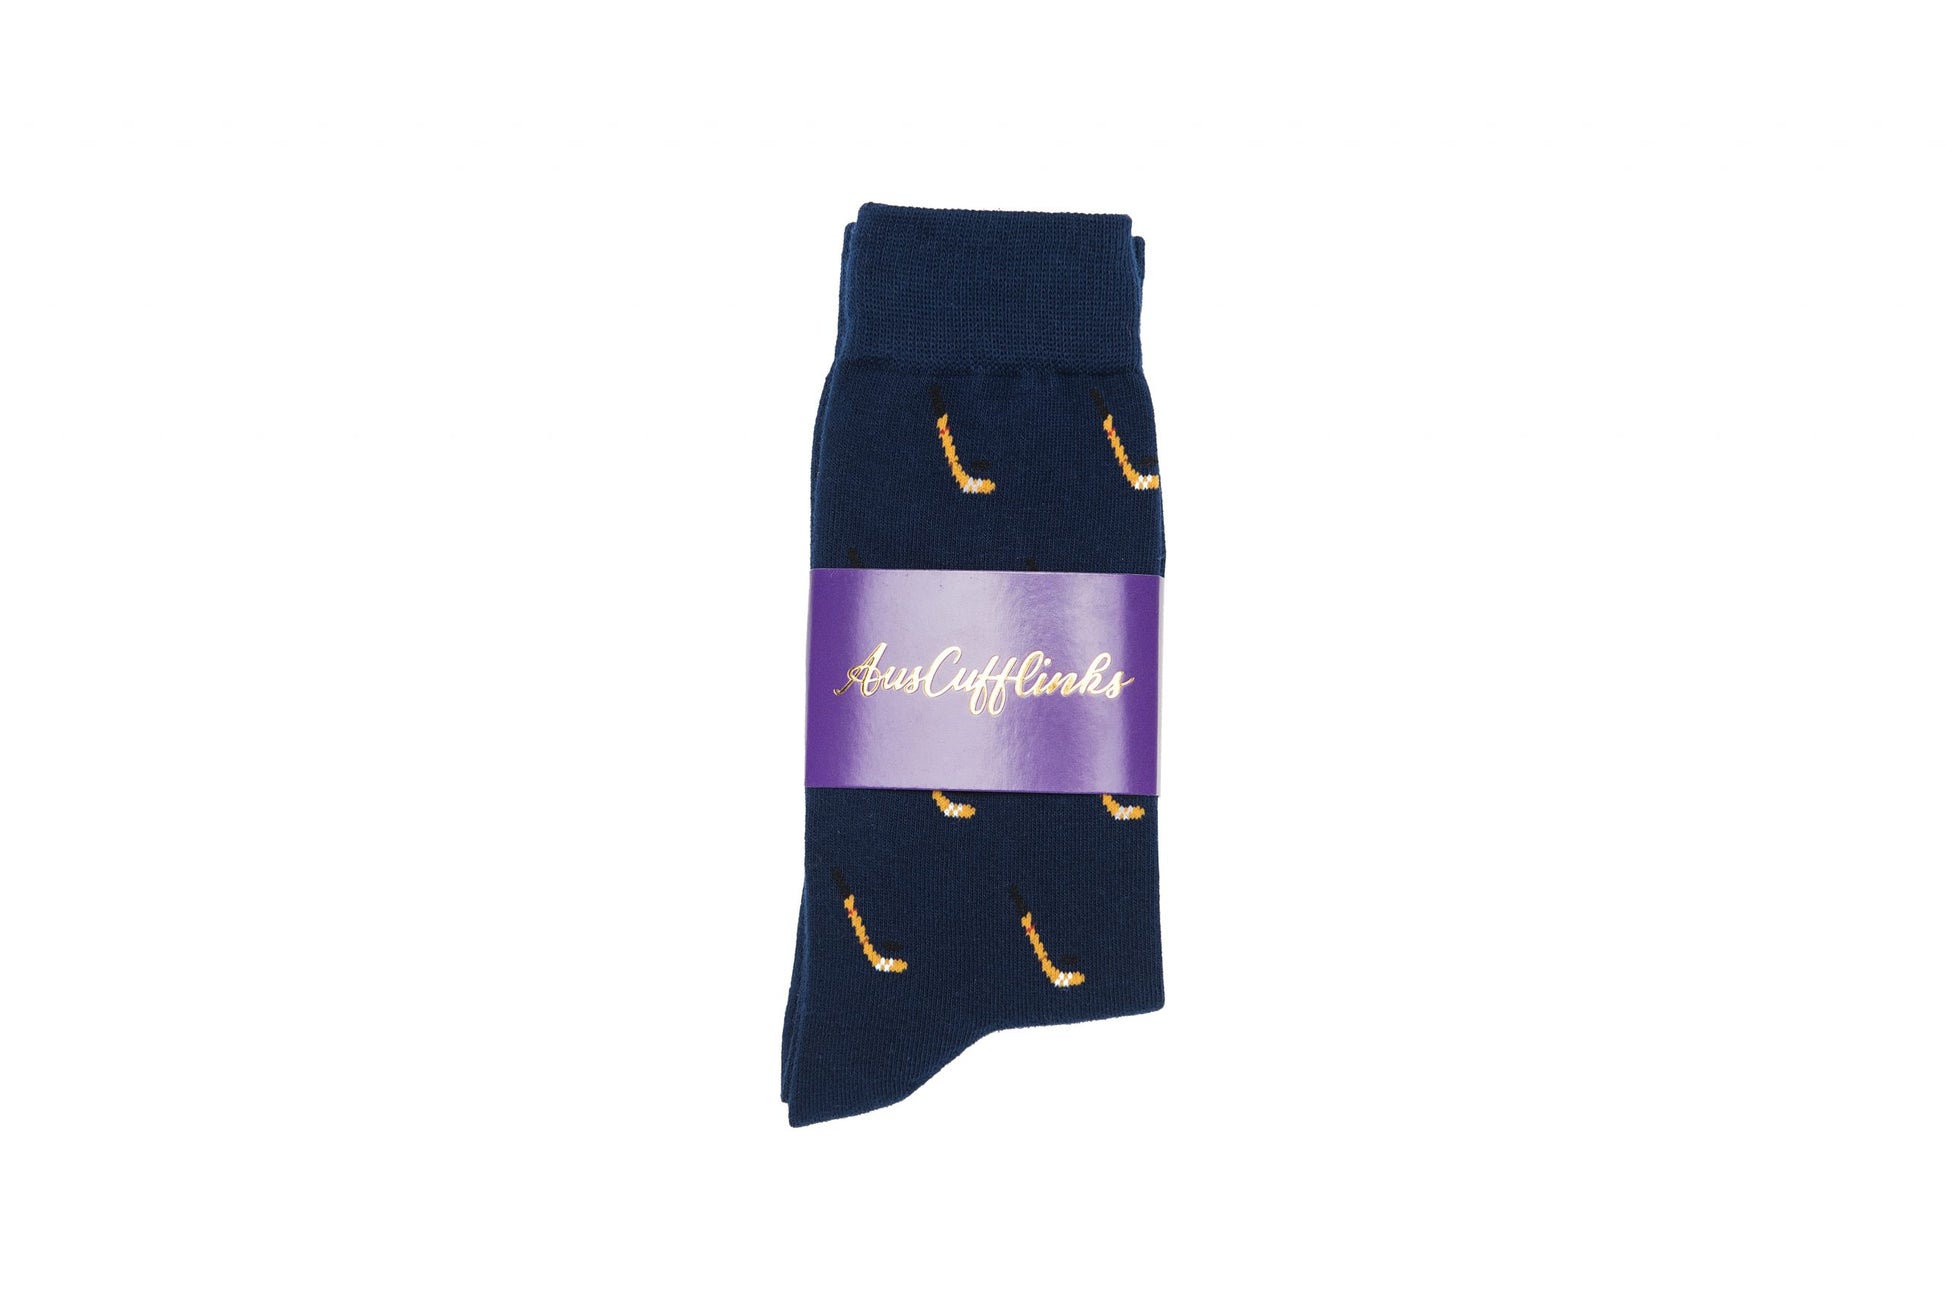 An Ice Hockey Sock with a gold logo on it is available.